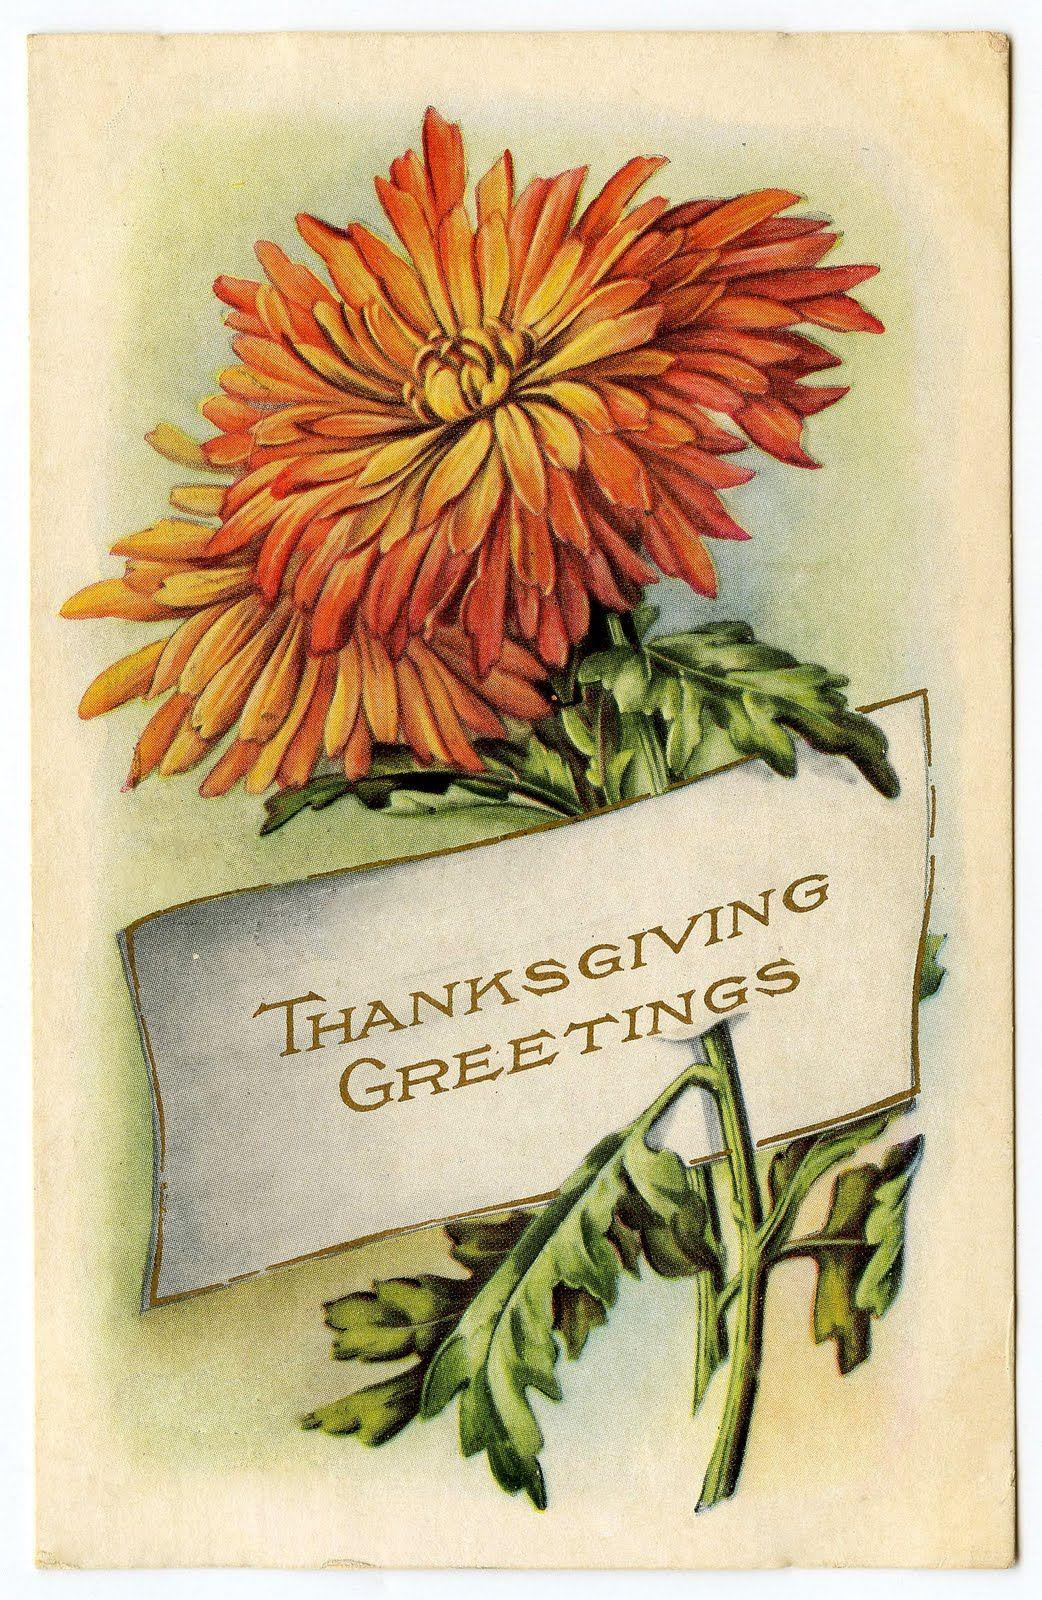 Vintage Thanksgiving Wallpapers Top Free Vintage Thanksgiving Backgrounds Wallpaperaccess